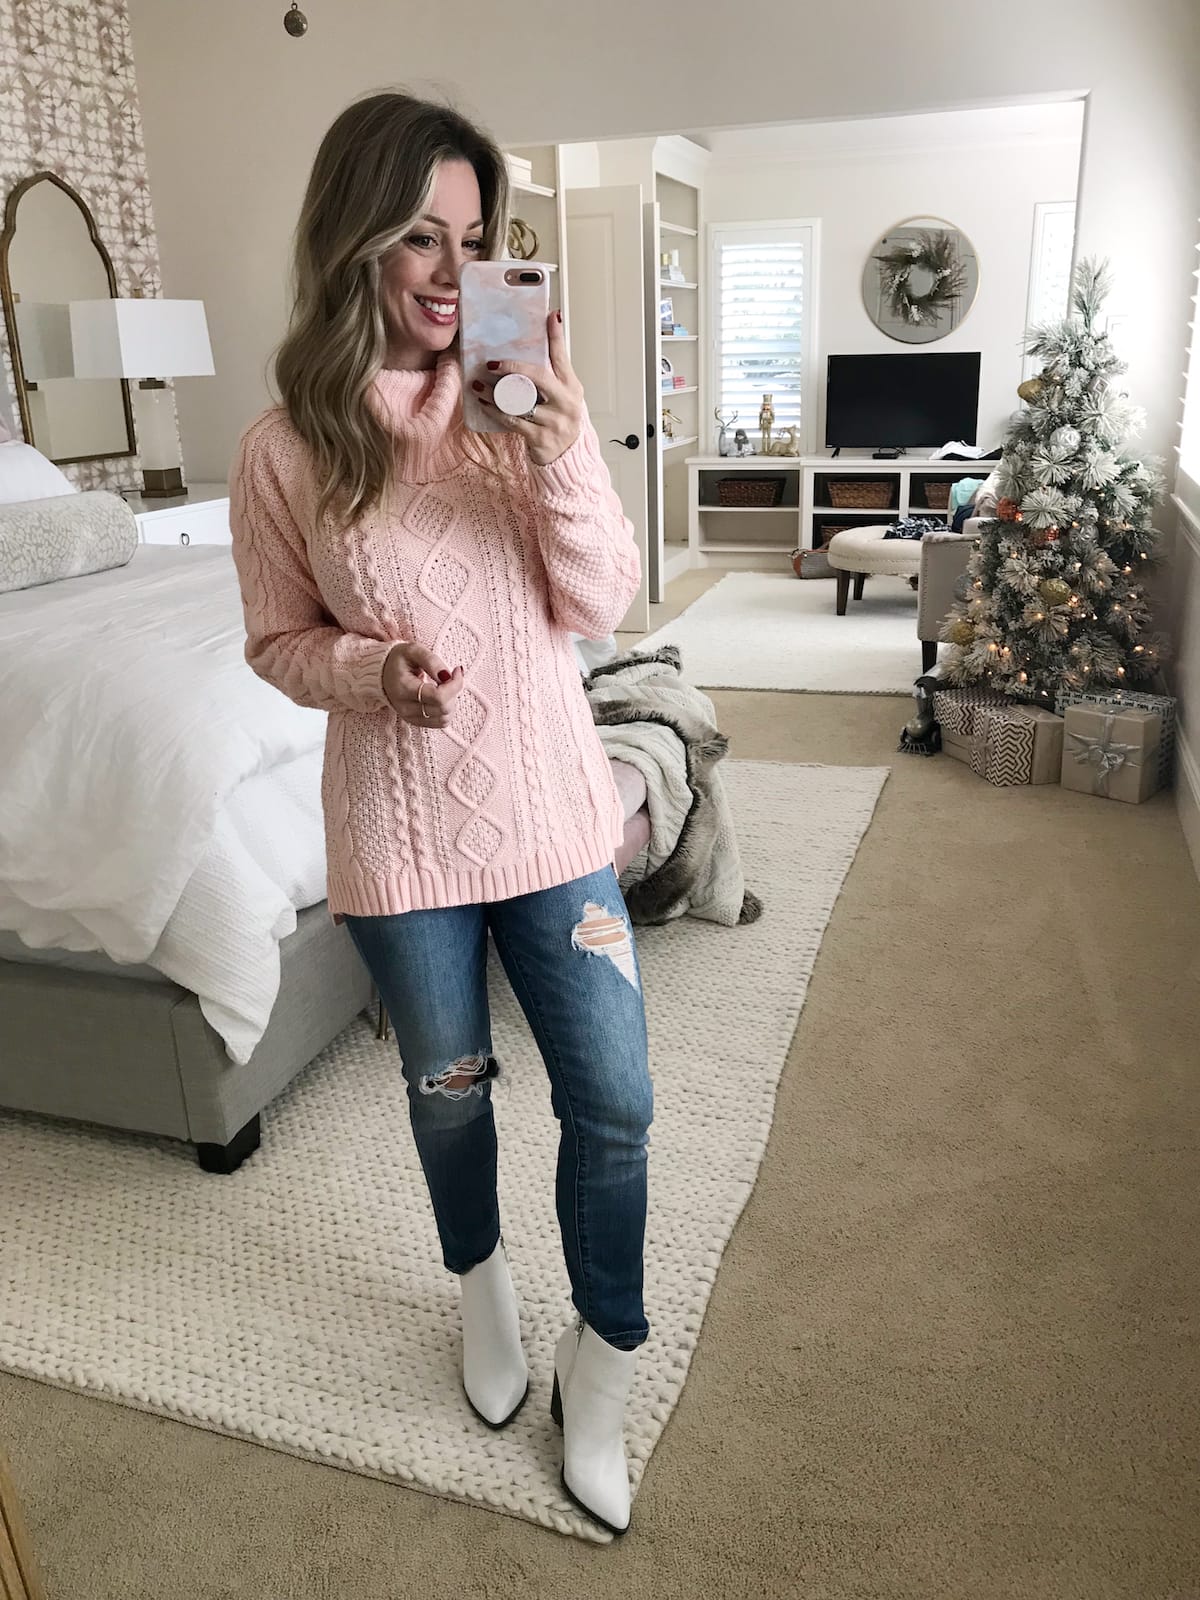 Amazon Fashion Haul - jeans and pink sweater